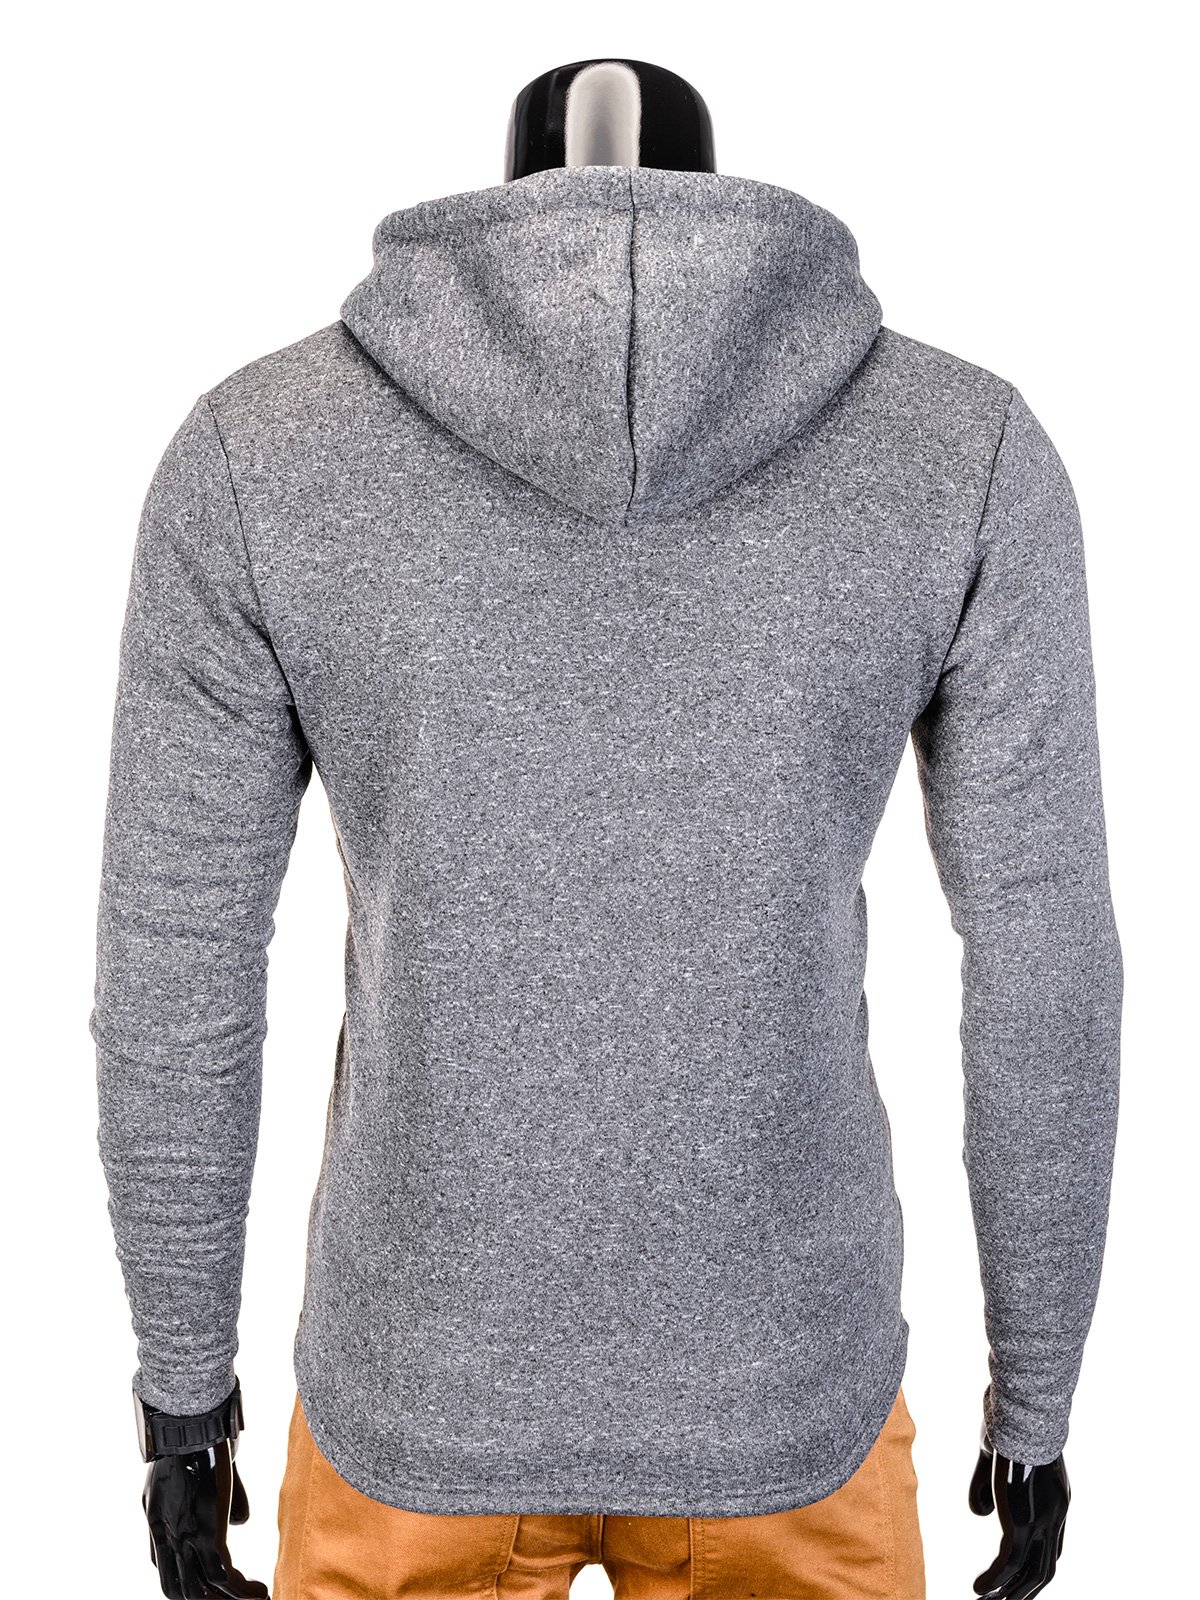 Men's hoodie with zipper B713 - grey | MODONE wholesale - Clothing For Men